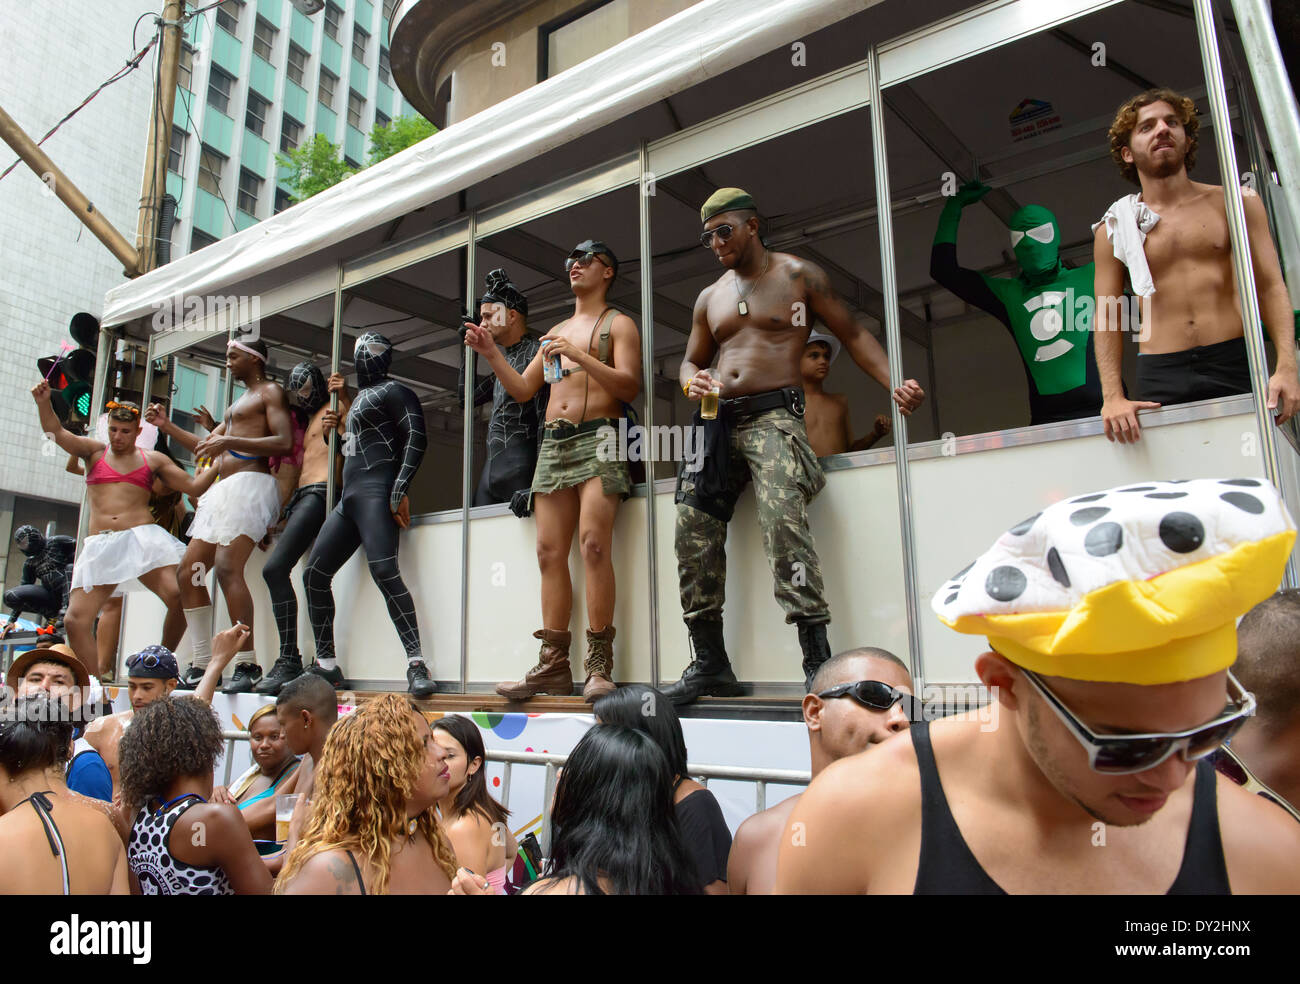 Crowds and crazy costumes on float at street party (bloco), downtown Rio de Janeiro during 2014 Carnival Stock Photo